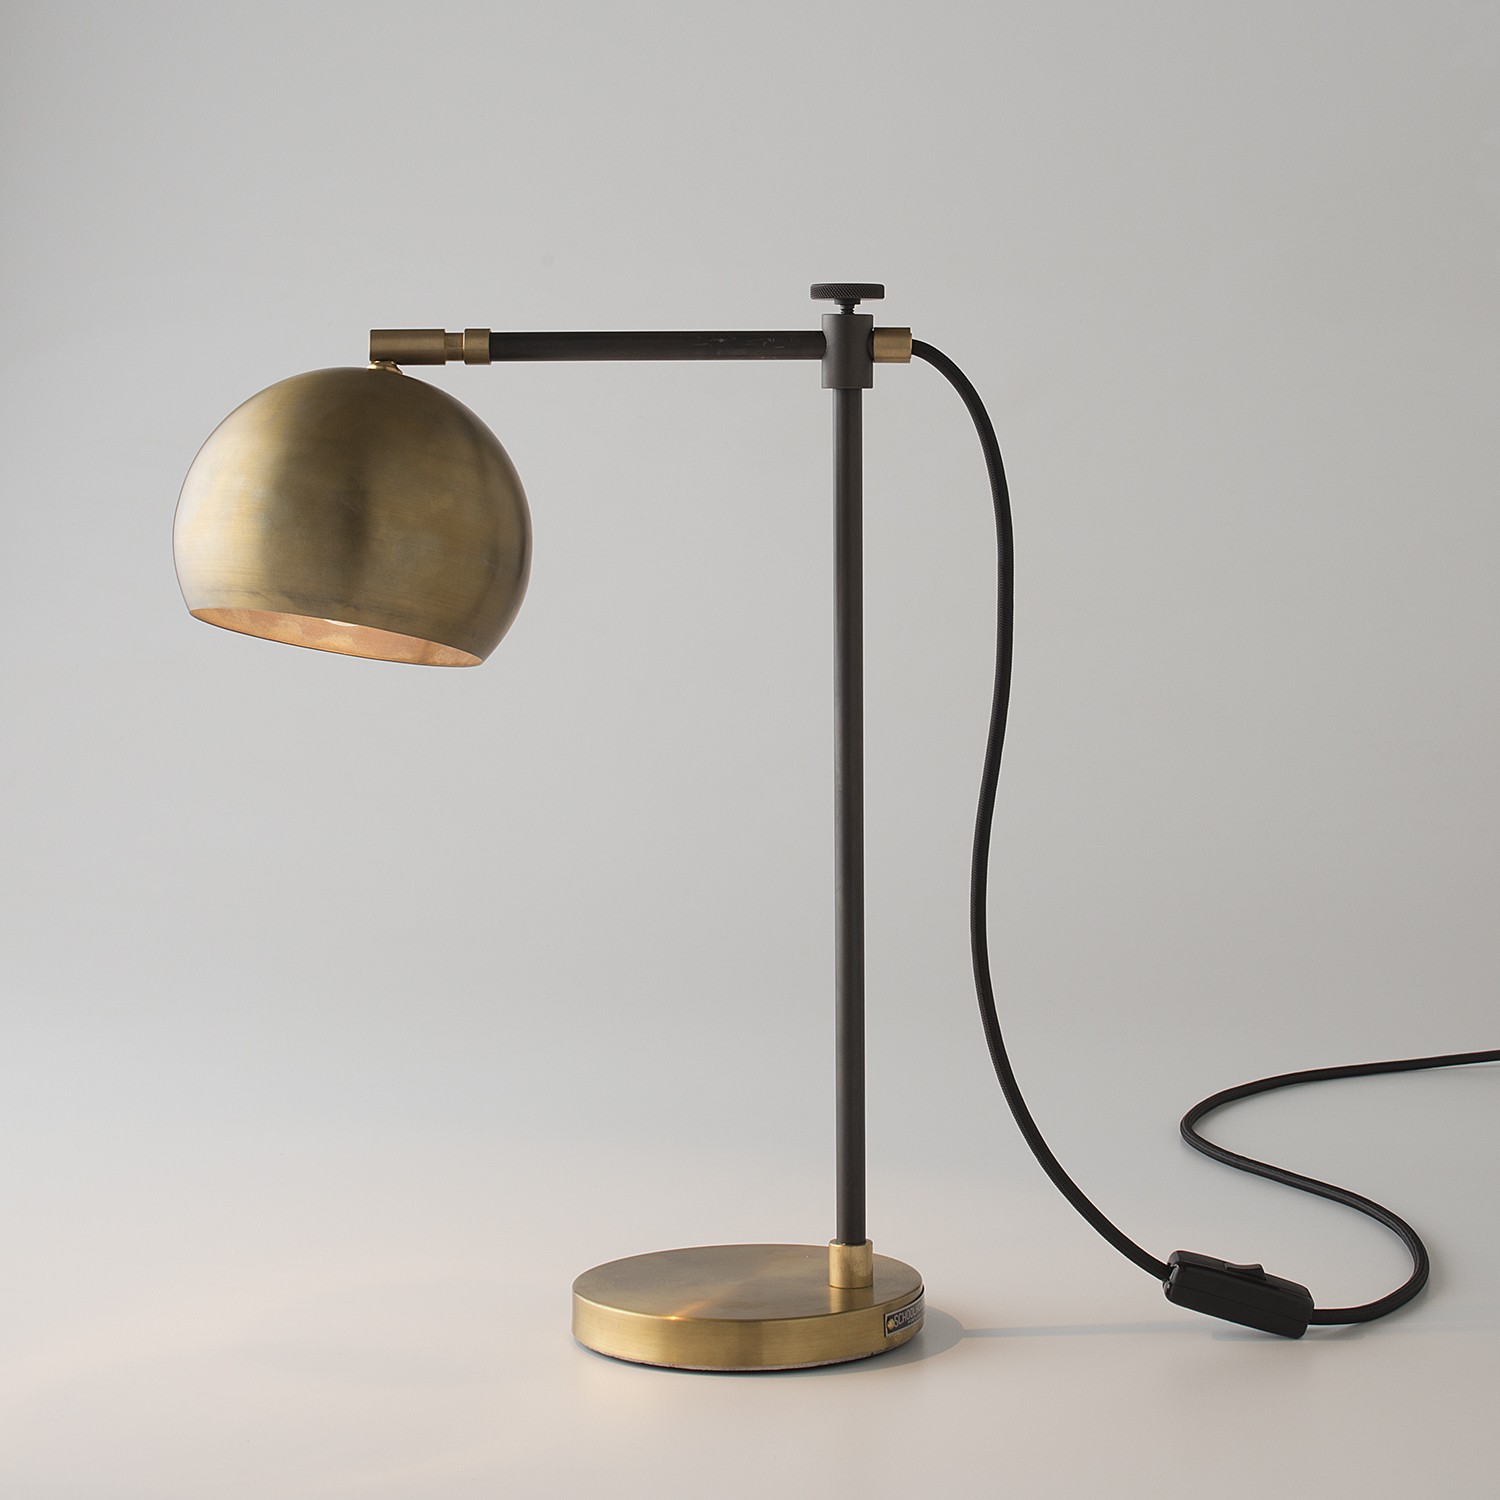 miles desk lamp from schoolhouseelectric